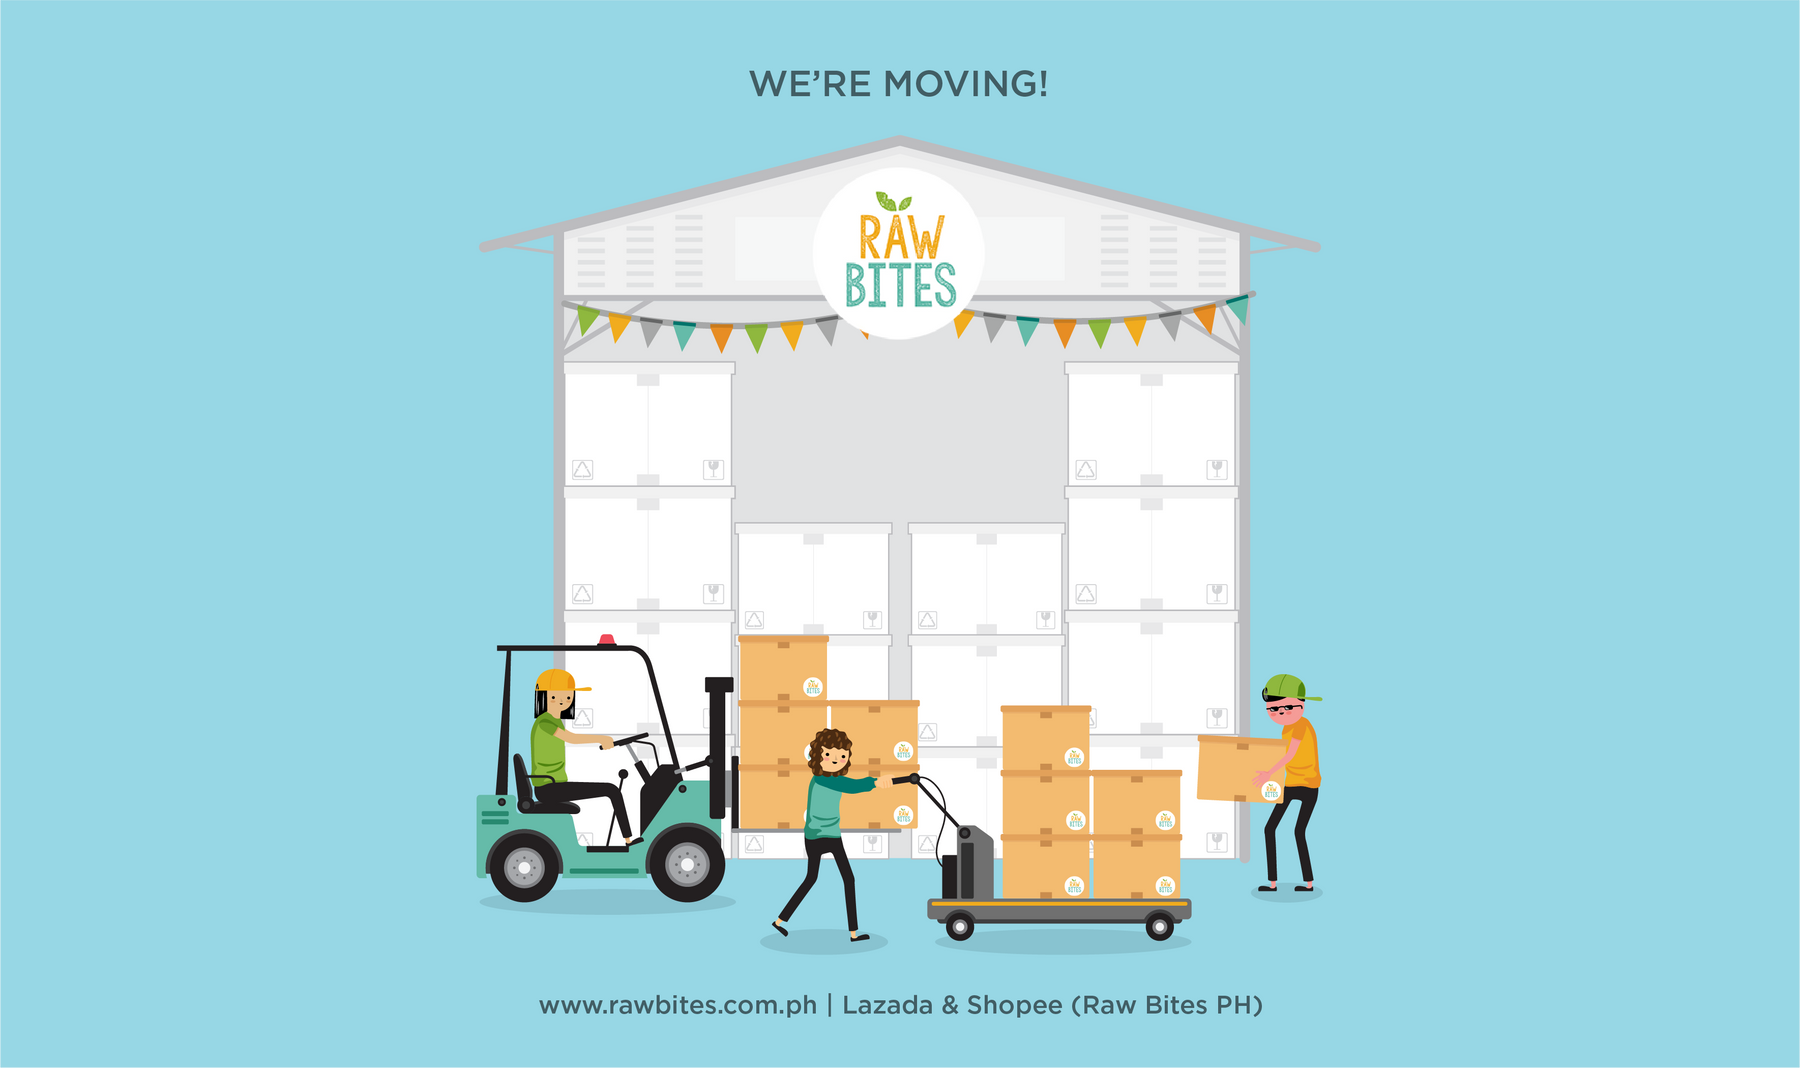 Raw Bites is moving!